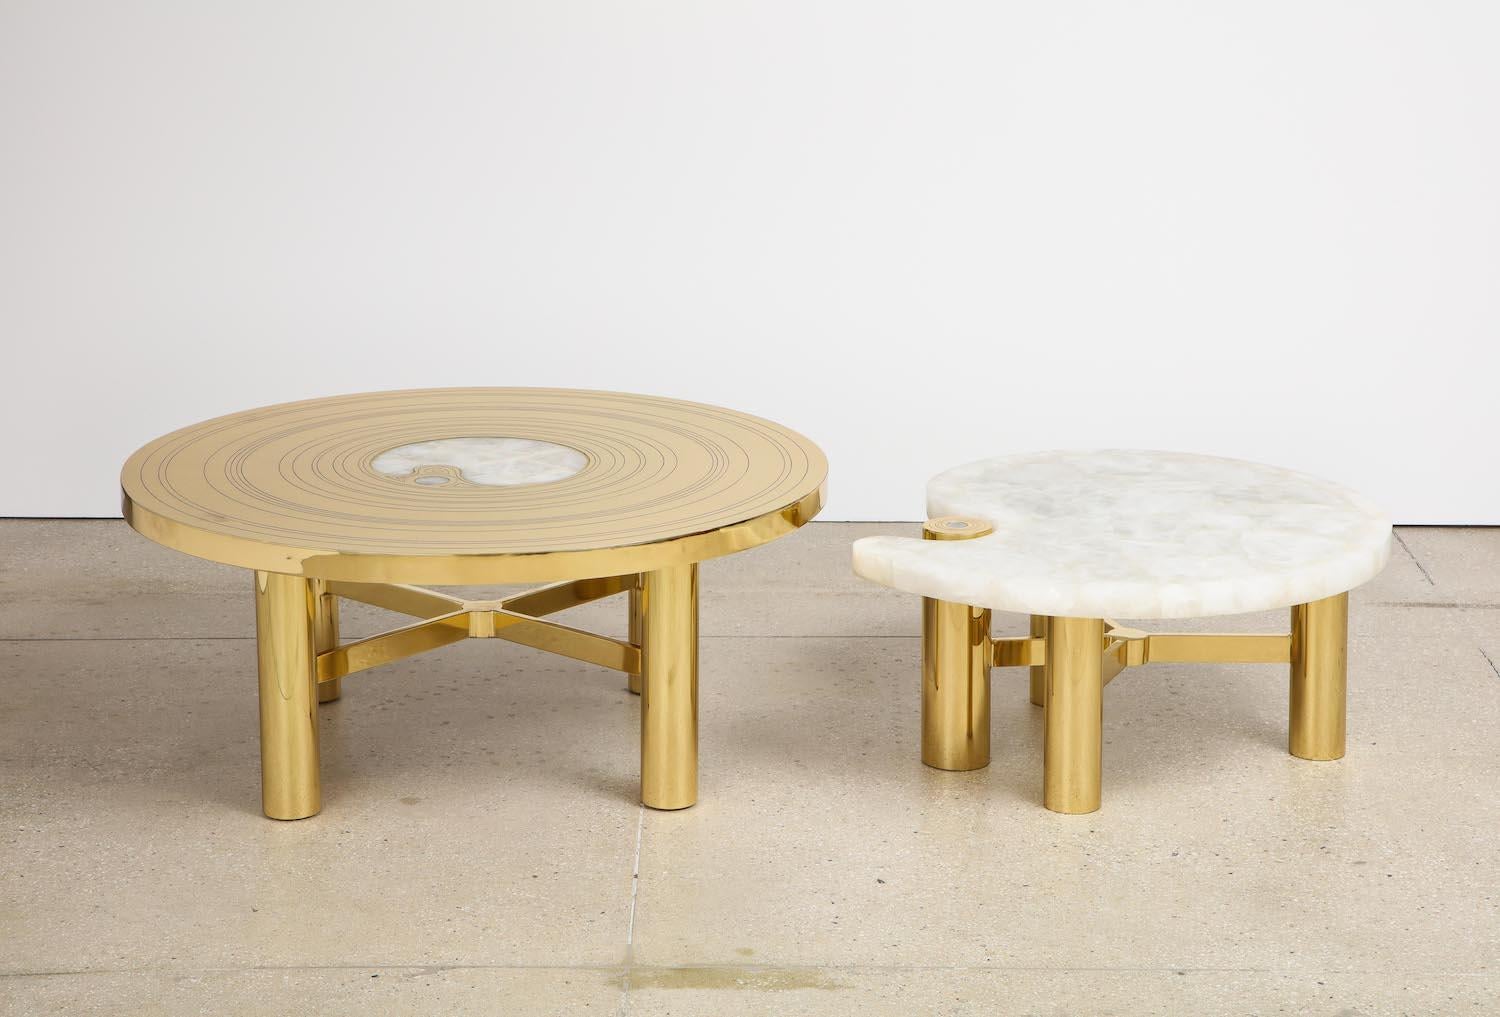 Polished brass, quartz.  2pc nest with larger table featuring incised brass top and inset quartz center.   Lower table with slab quartz top.  15-20 weeks lead time.
h. 16.75” / 14”   Diam. 39” / 31.5”     Extended length with one table nested